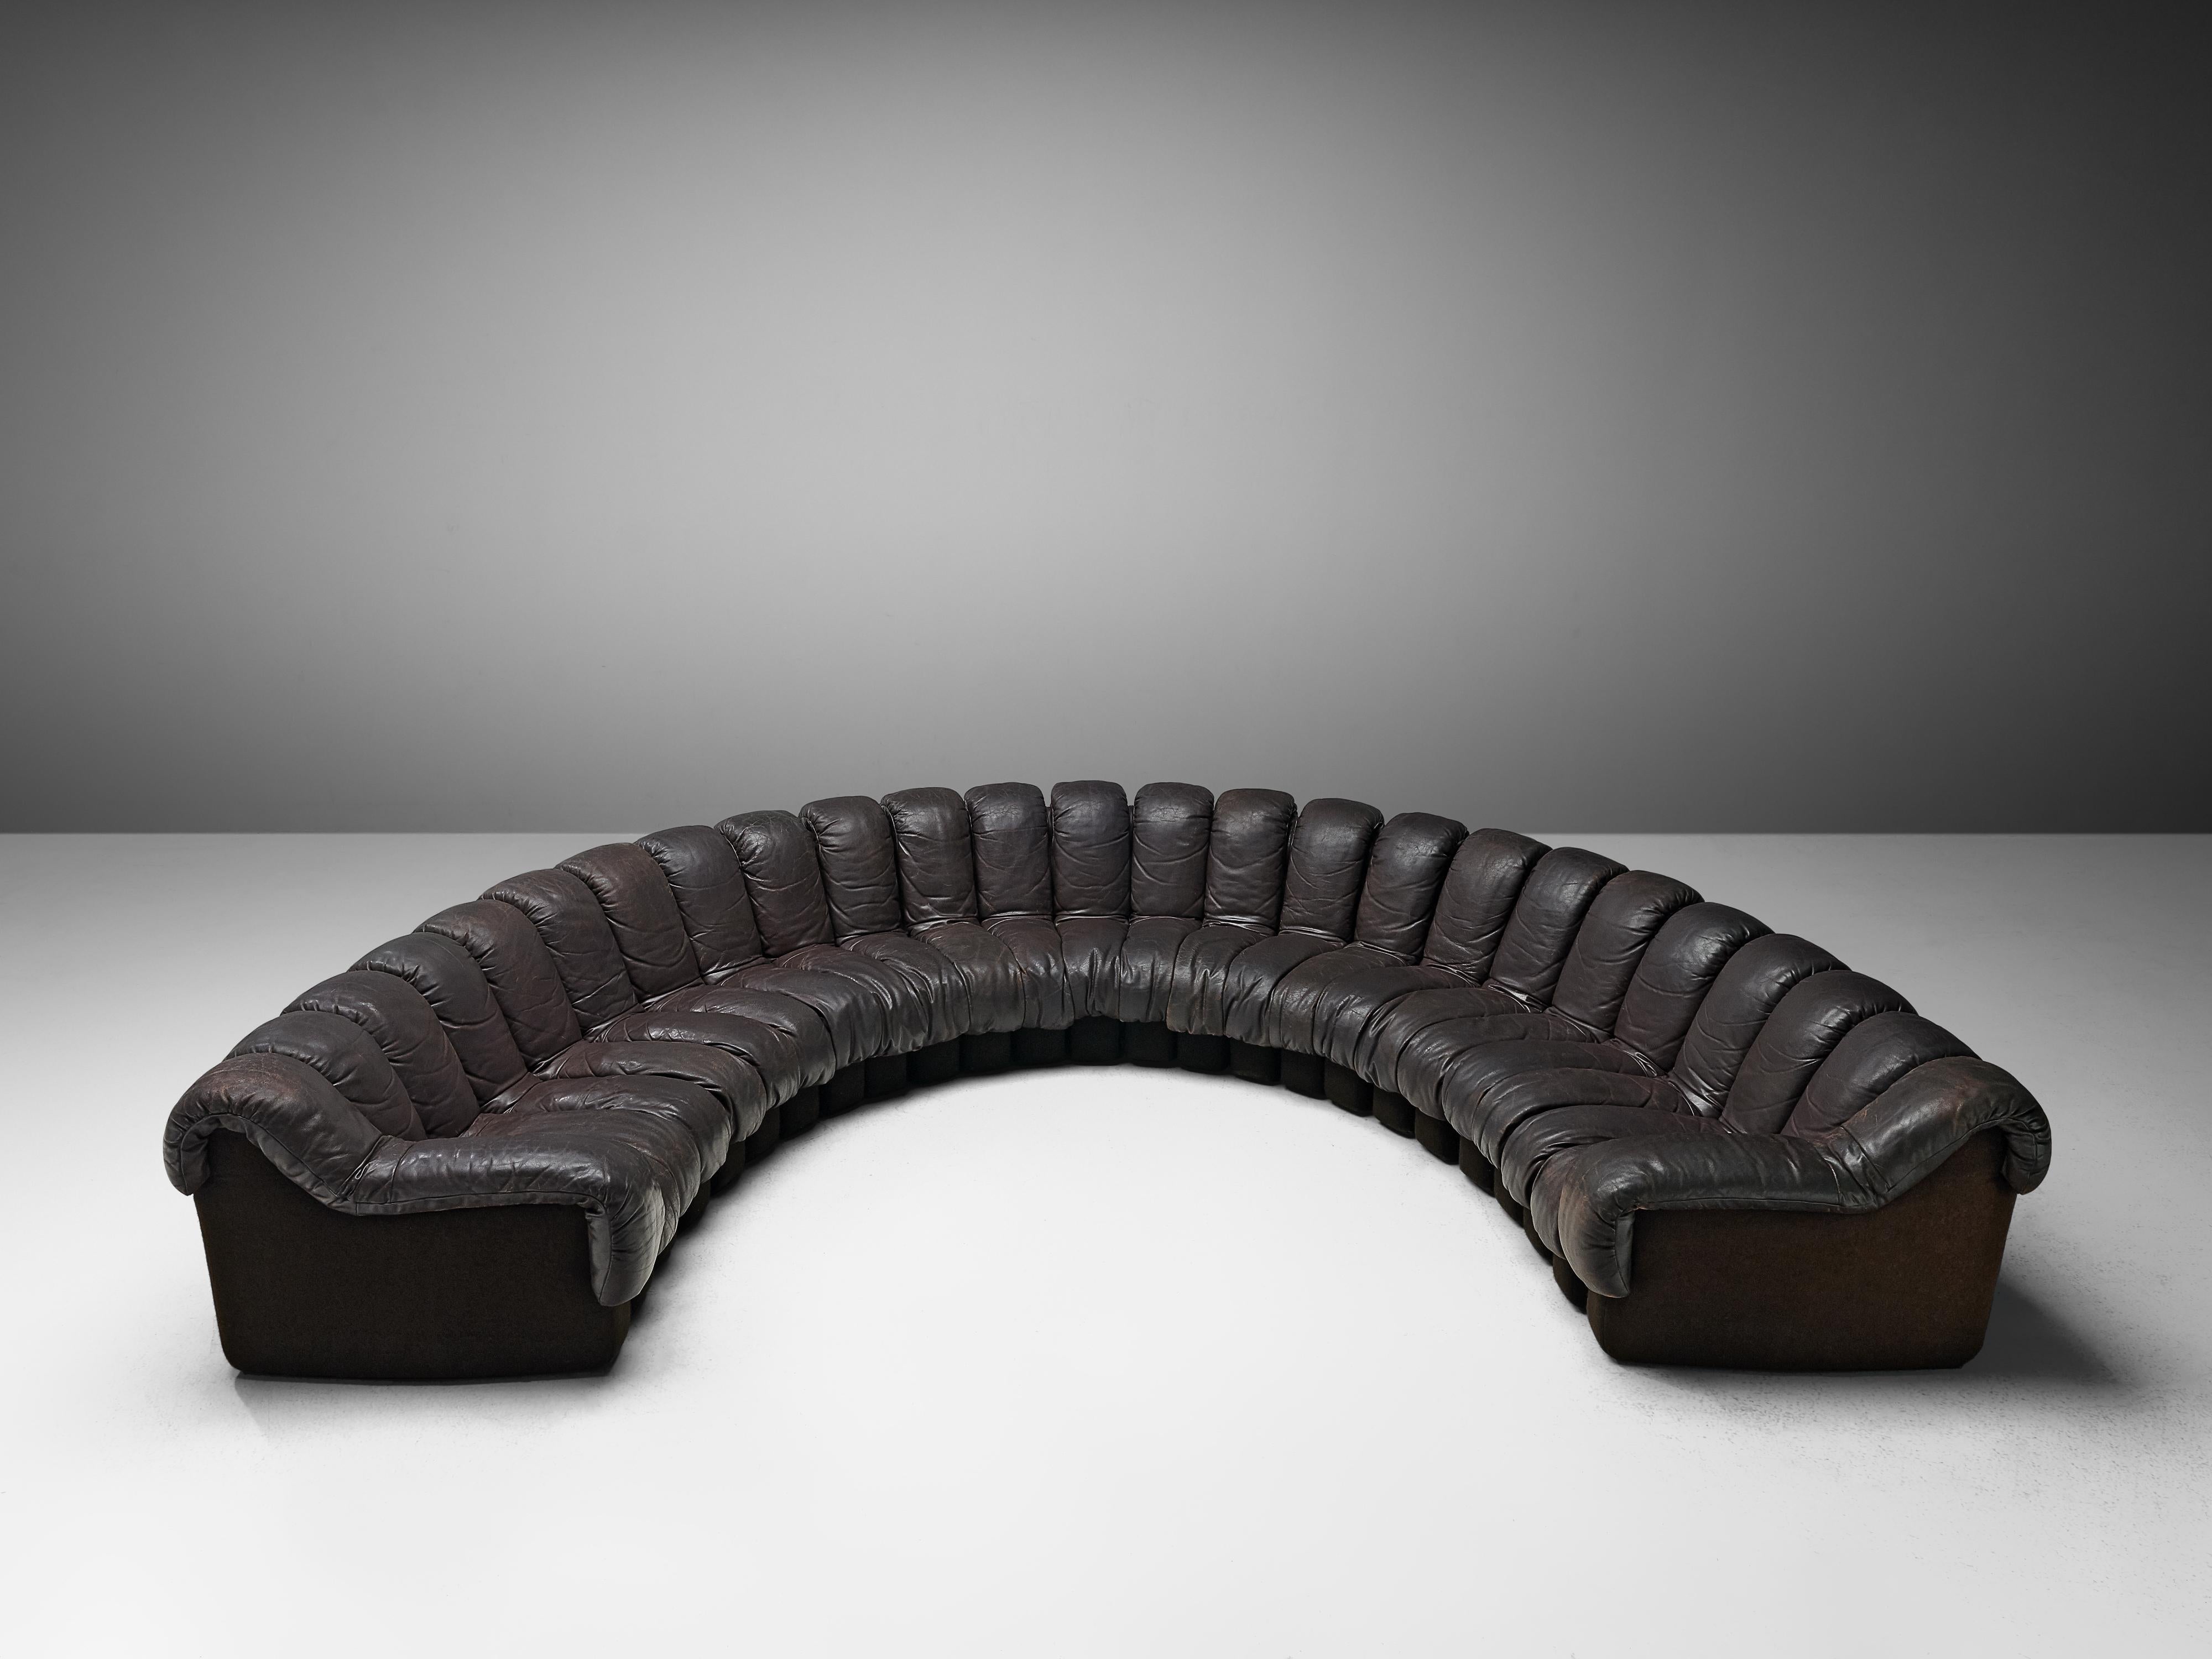 De Sede ‘Snake’ DS-600, dark brown leather, fabric, Switzerland, 1972

A design by Ueli Berger, Elenora Peduzzi-Riva, Heinz Ulrich and Klaus Vogt for DeSede, Switzerland. De Sede 'Non Stop' sectional sofa containing twentythree seating pieces and